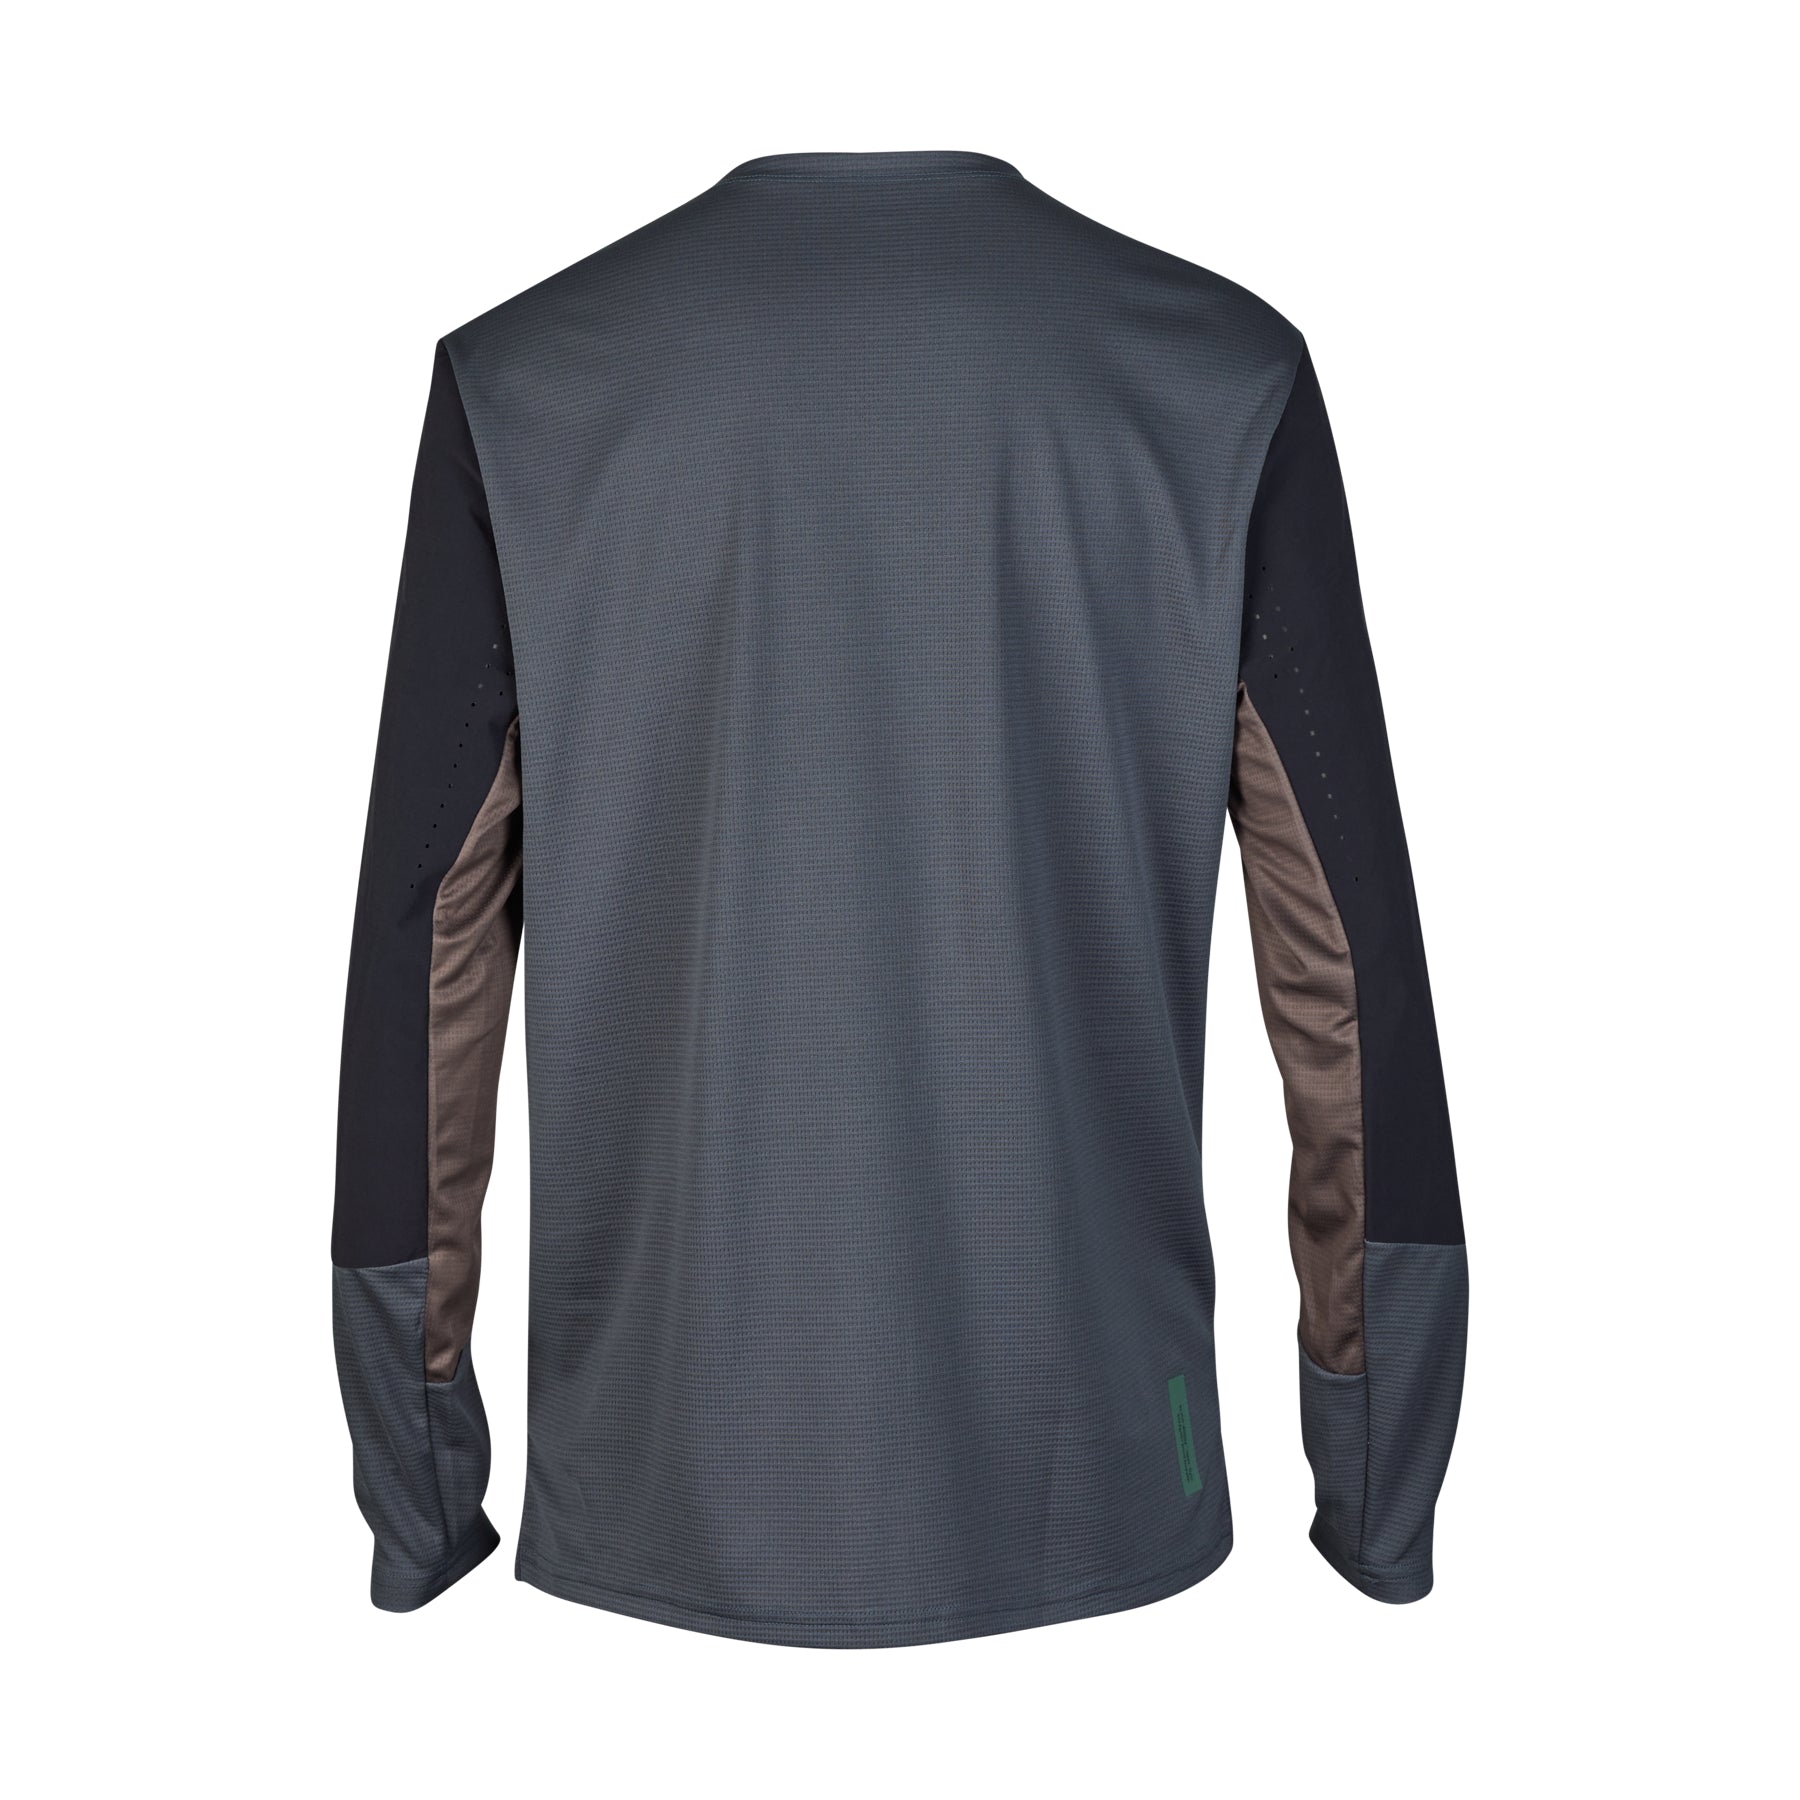 Fox Defend Long Sleeve Jersey - L - Graphite - Image 2